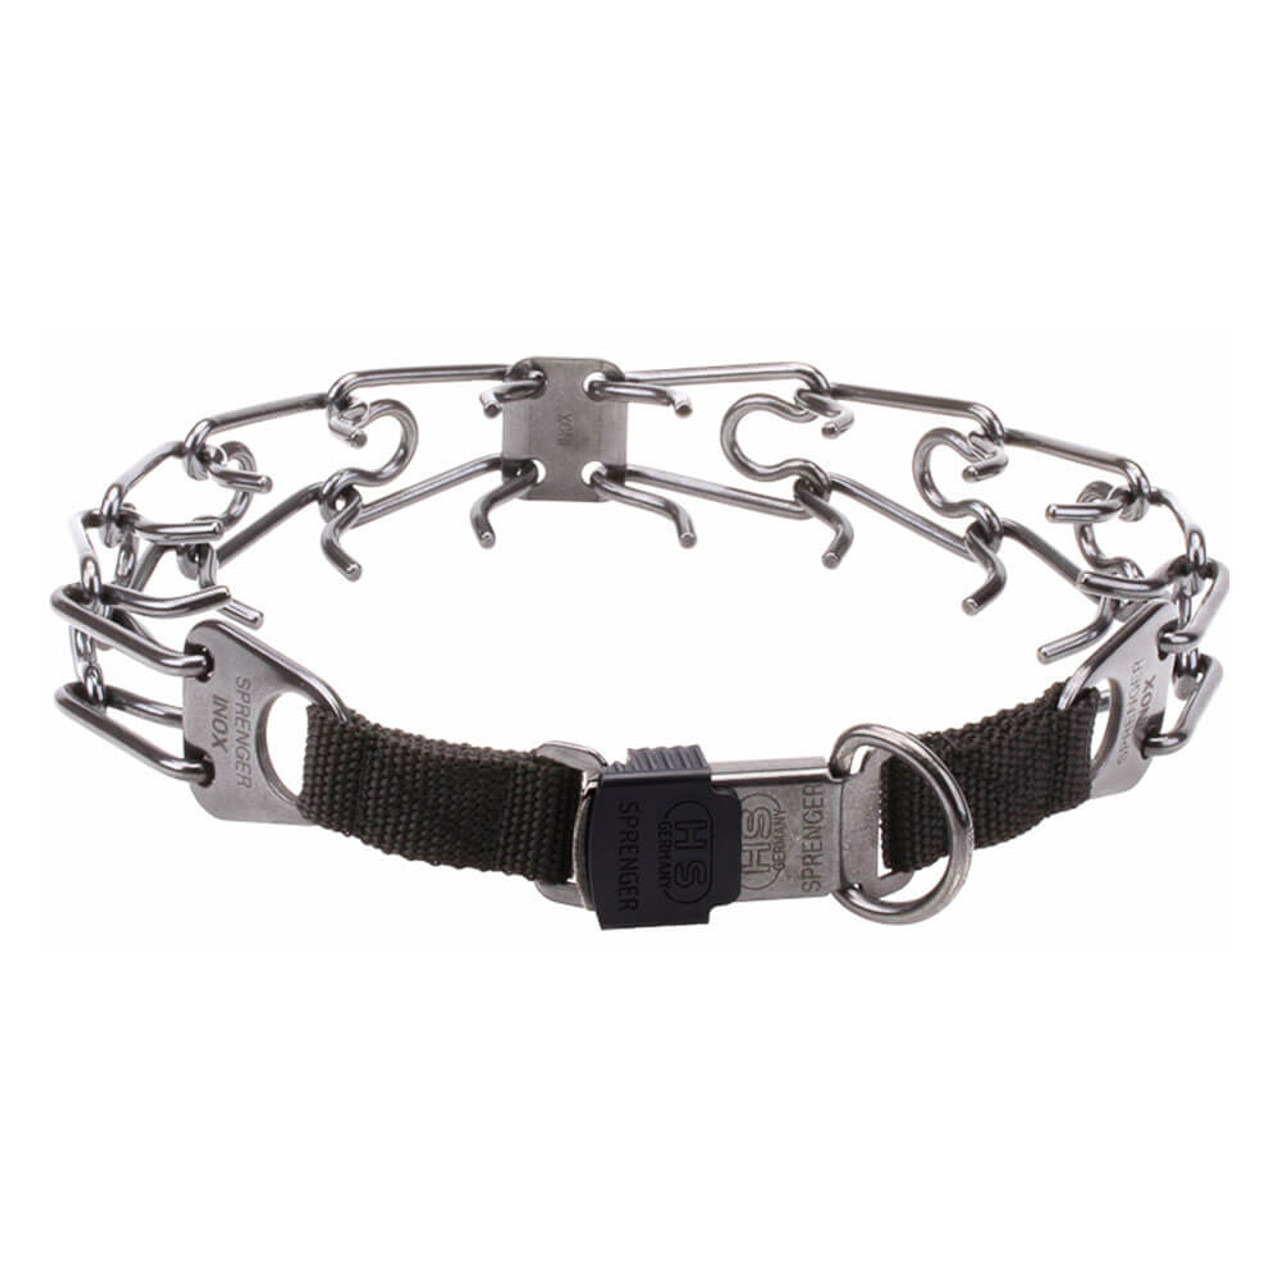 Herm Sprenger 3.2 mm Stainless Steel Training Collar with Safety Buckle One Size